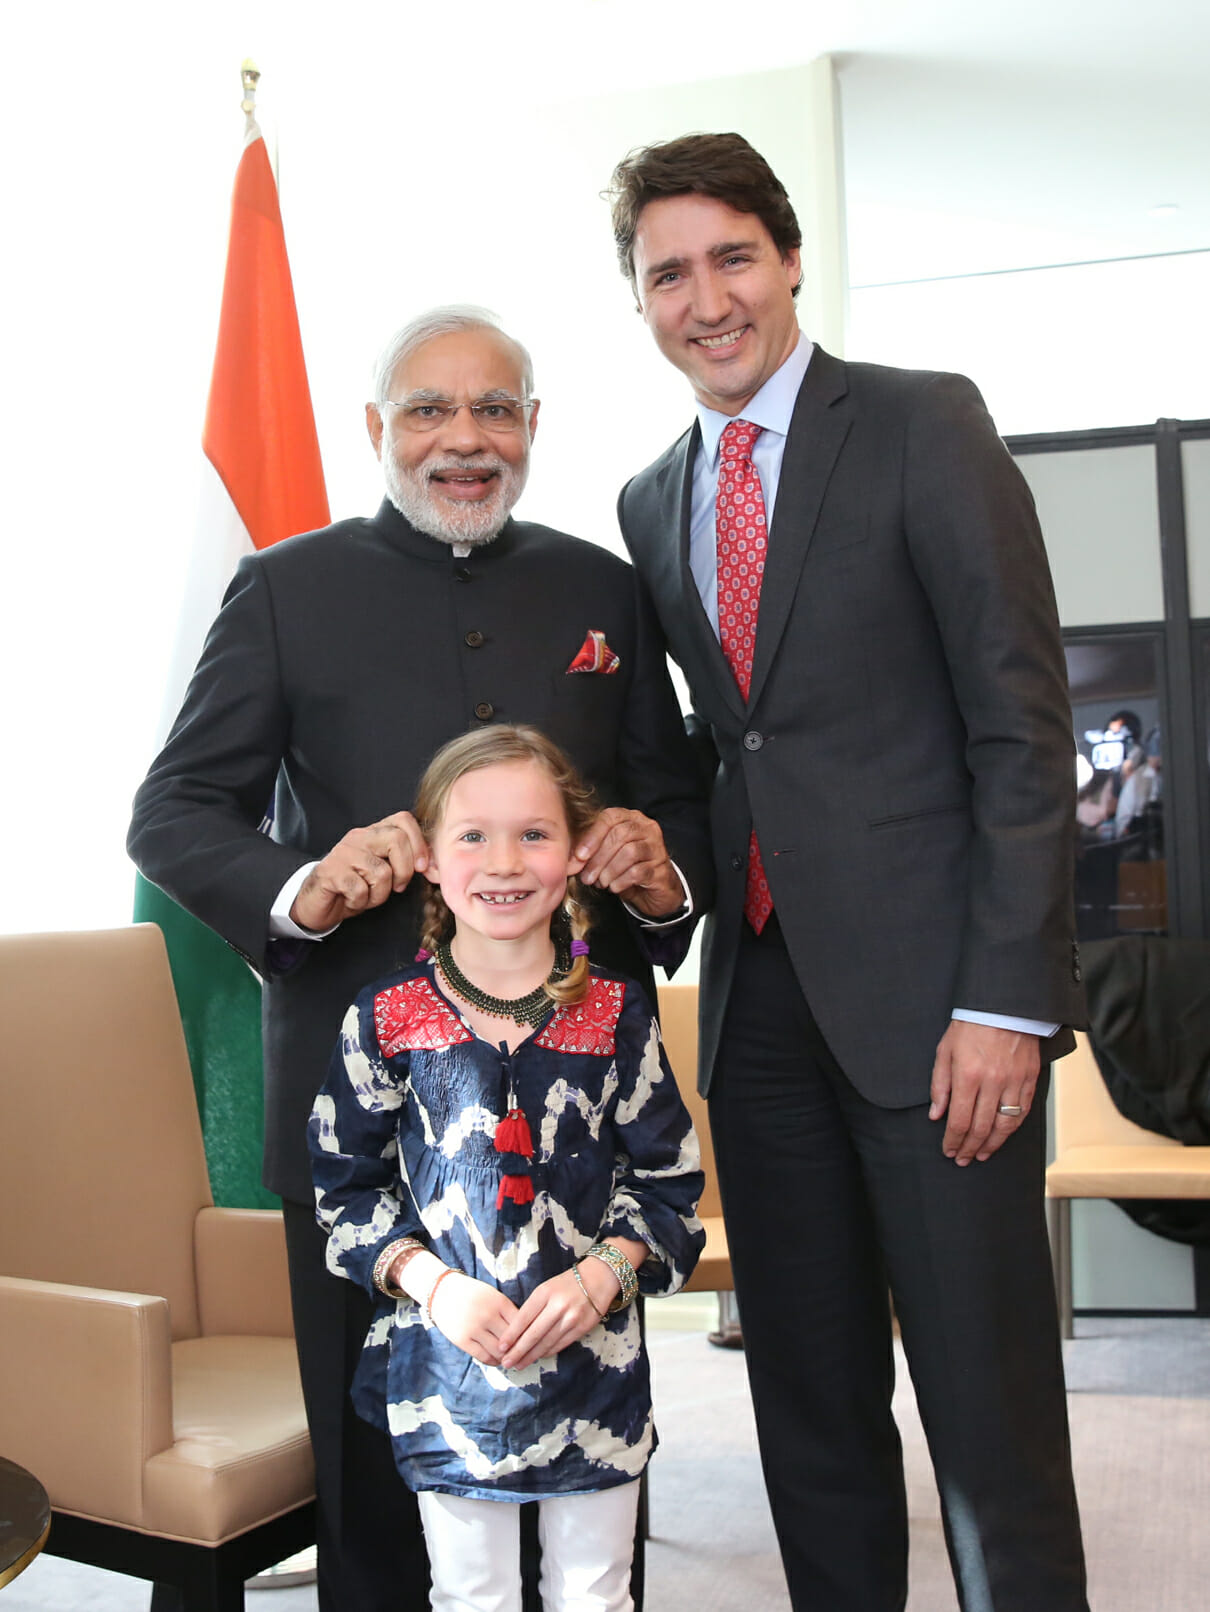 Prime Minister Narendra Modi with Justin Trudeau, and luckily his daughter Ella-Grace was able to make it